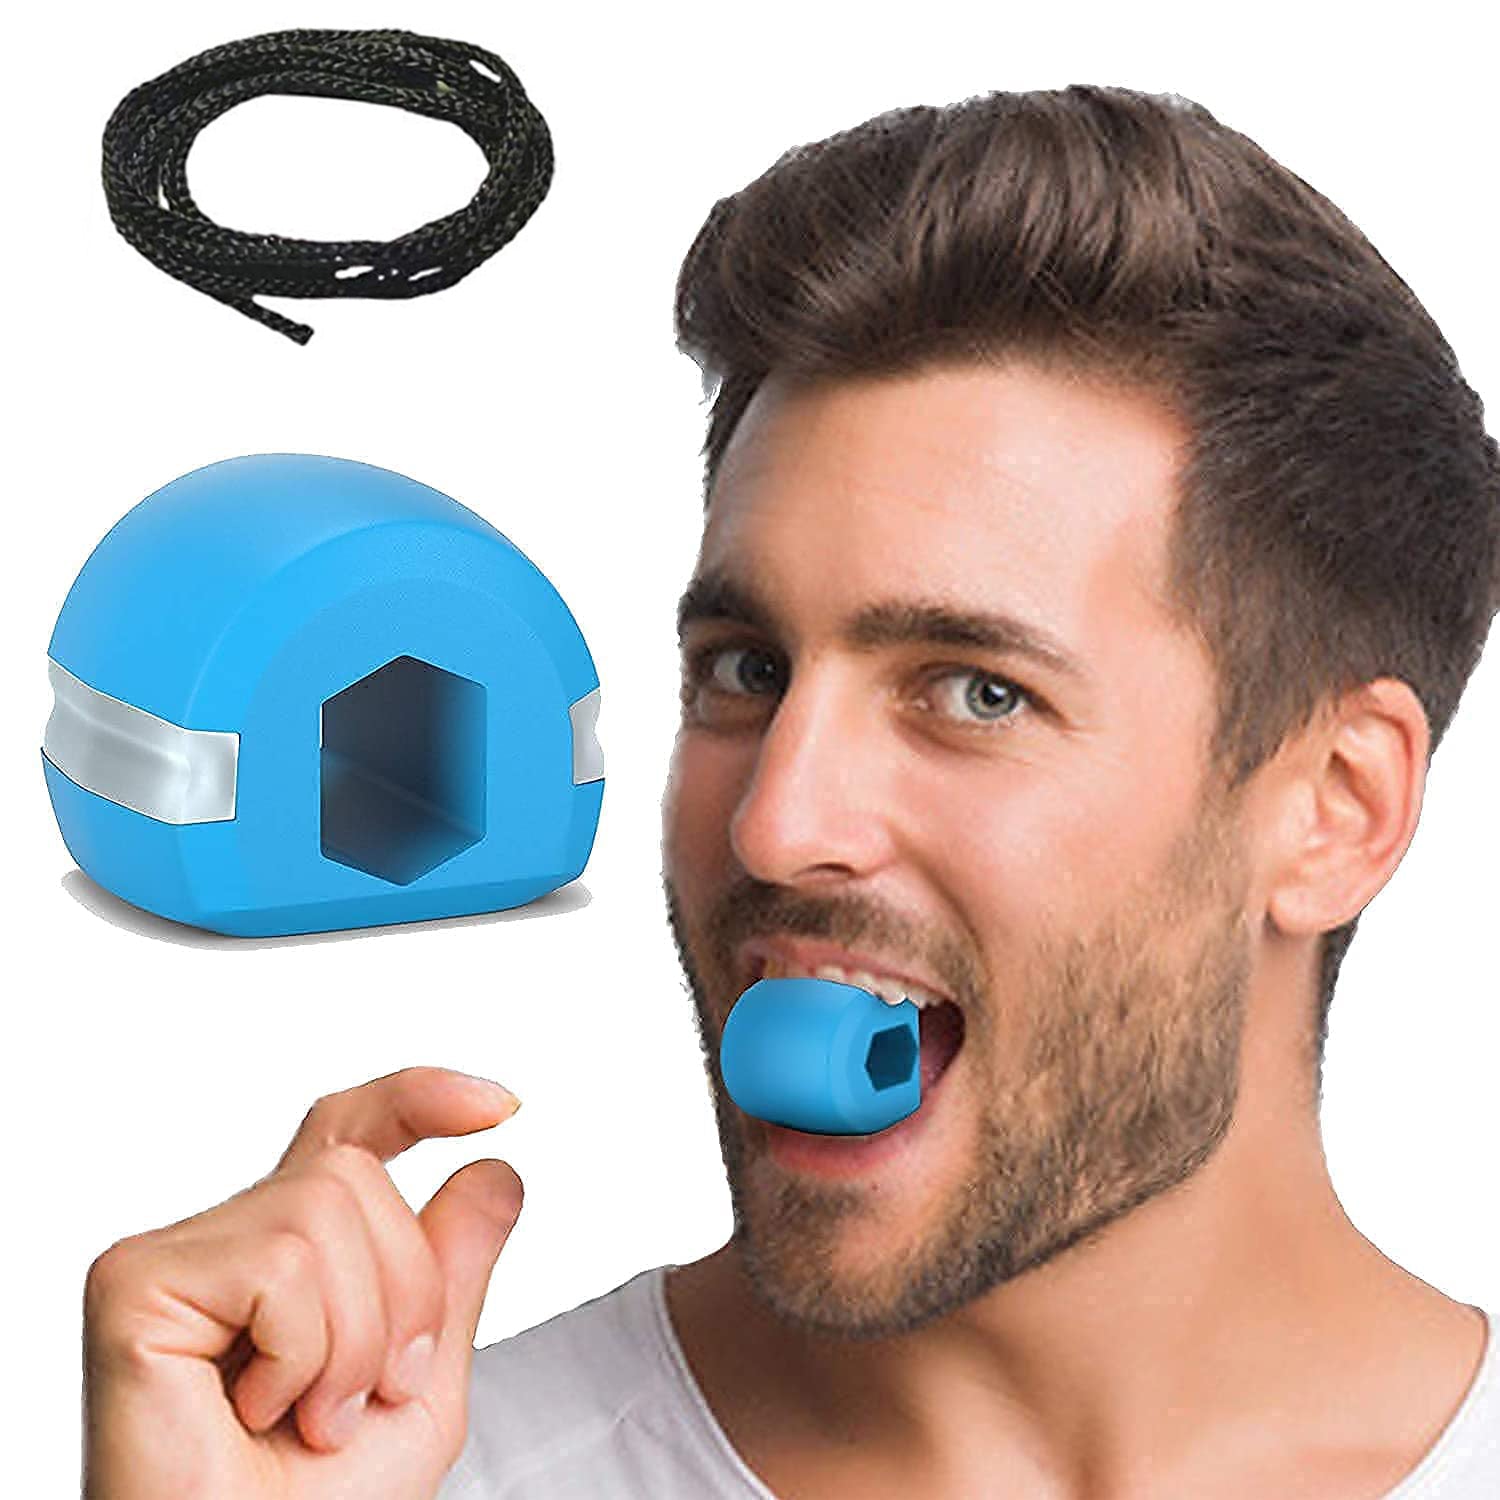 6101 V Cn Blue Jaw Exerciser Used To Gain Sharp And Chiselled Jawline Easily And Fast. DeoDap